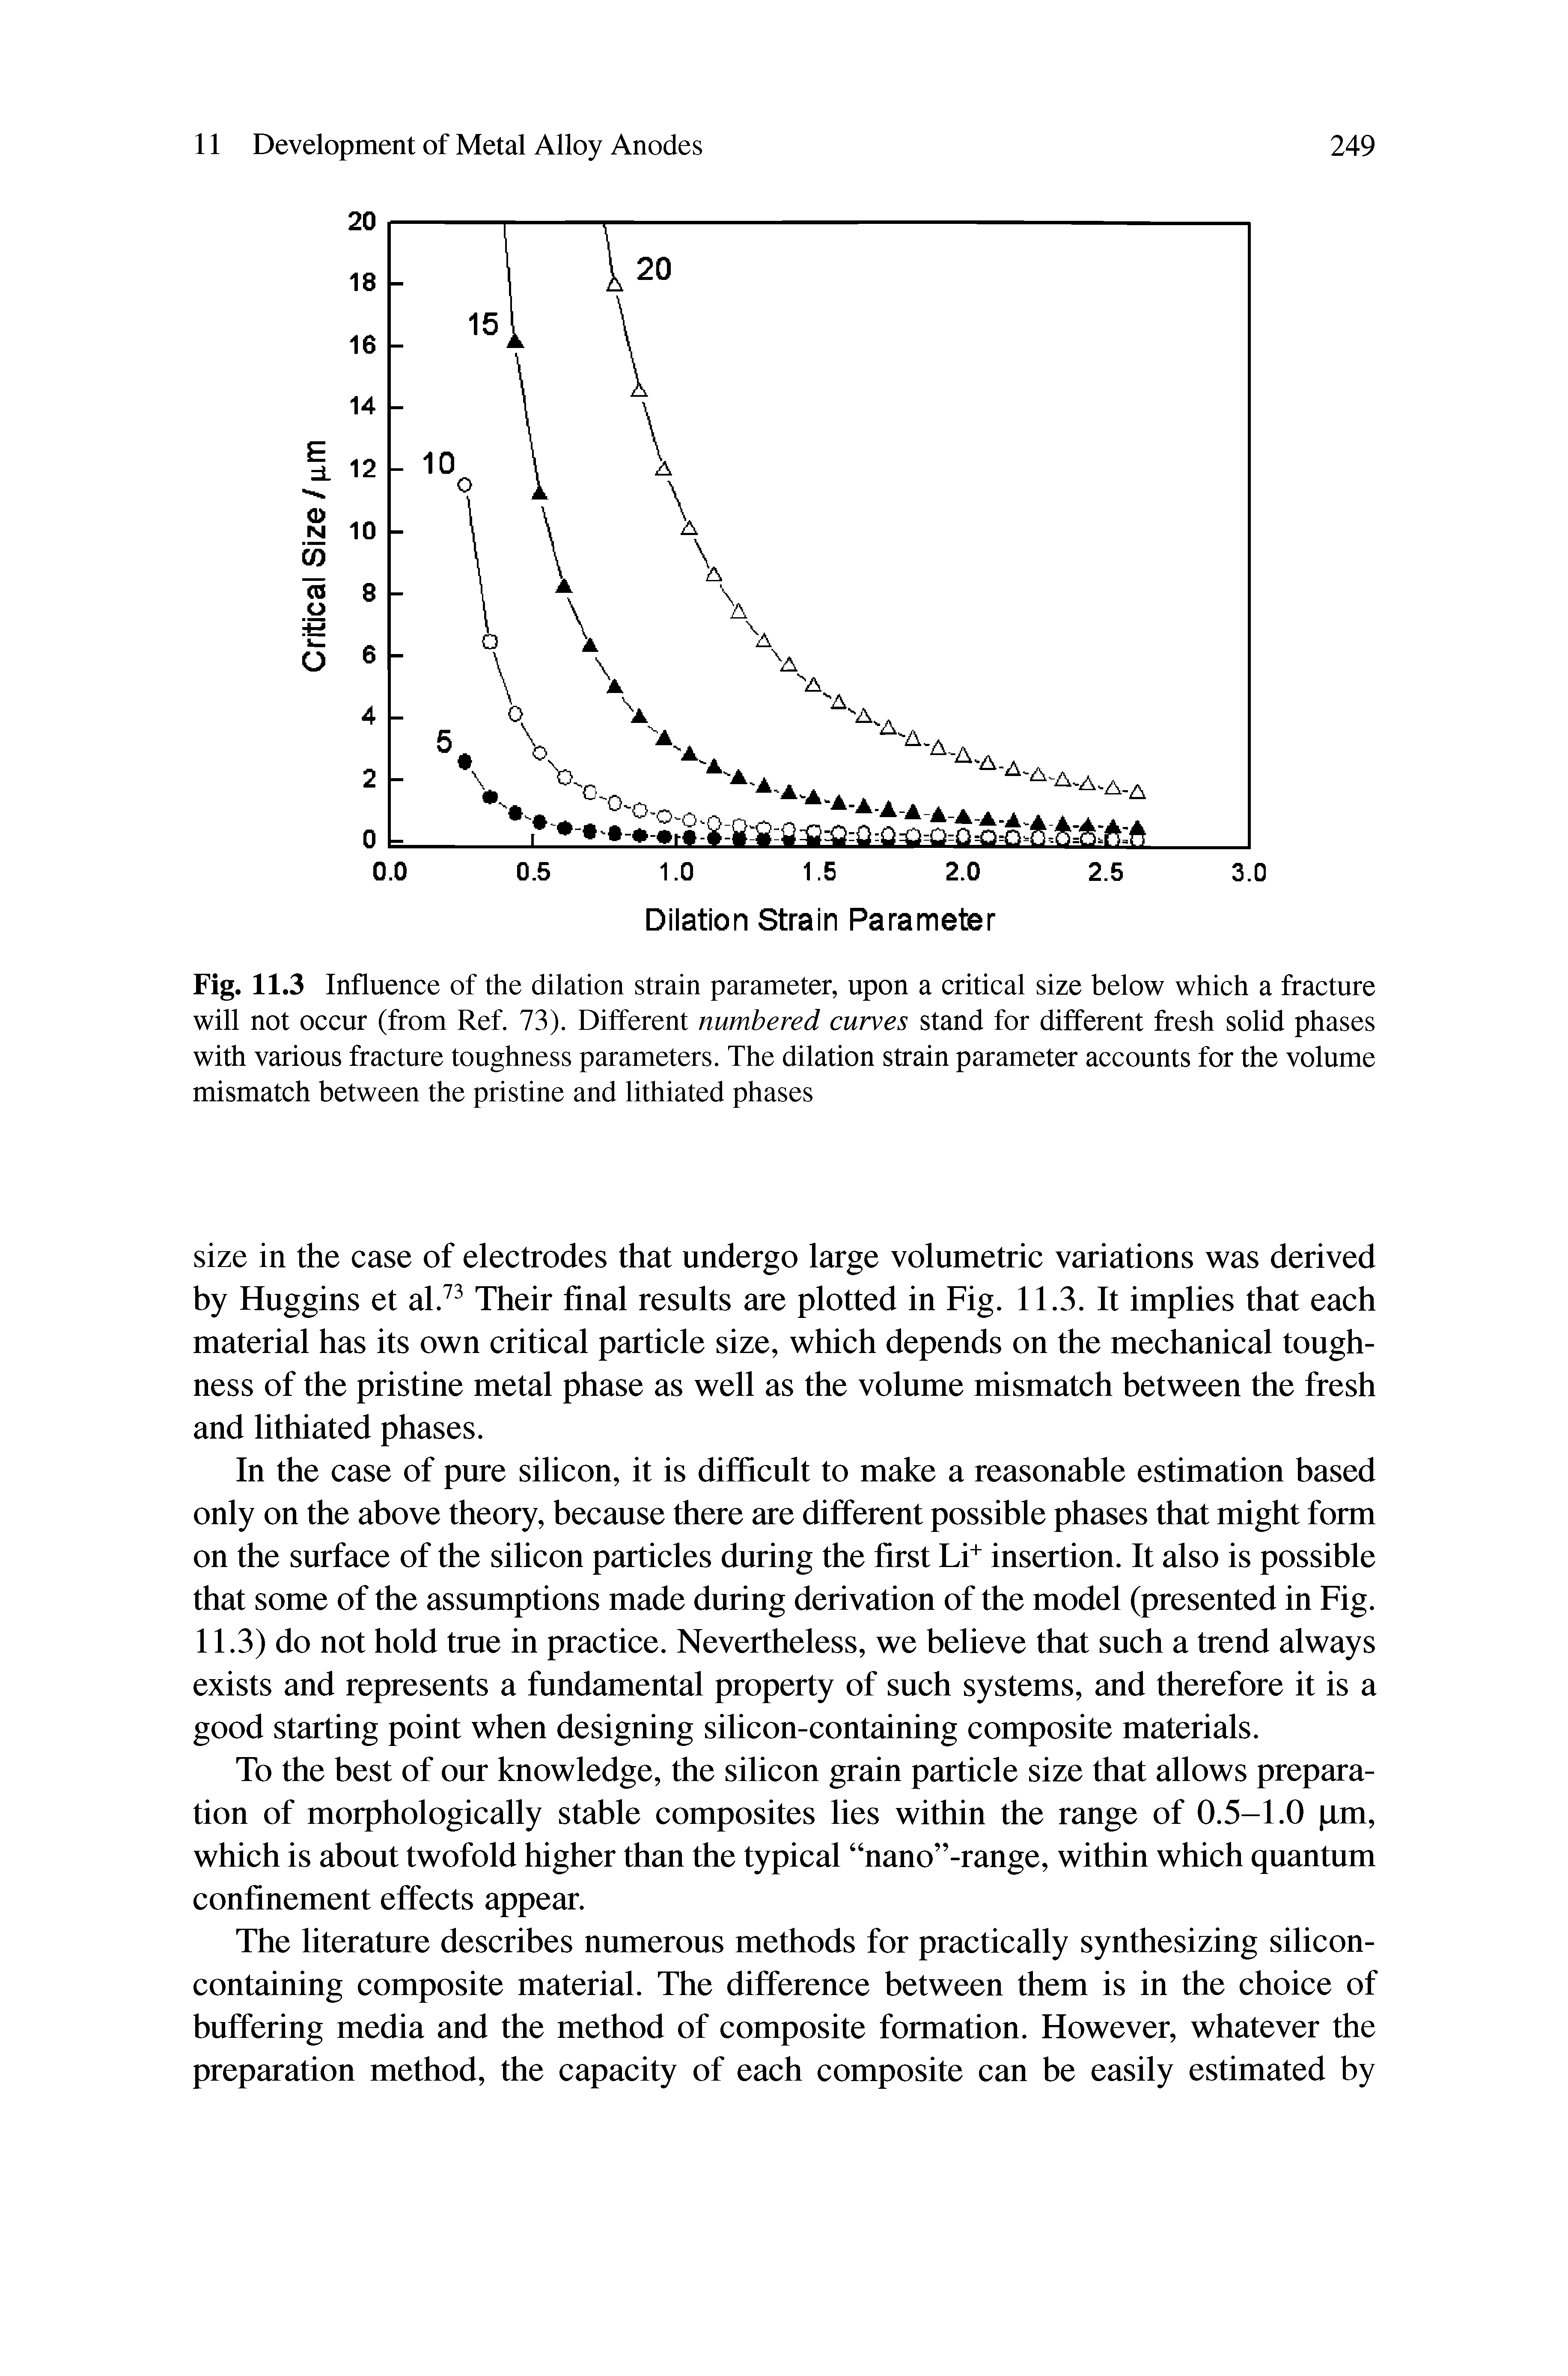 Fig. 11.3 Influence of the dilation strain parameter, upon a critical size below which a fracture will not occur (from Ref. 73). Different numbered curves stand for different fresh solid phases with various fracture toughness parameters. The dilation strain parameter accounts for the volume mismatch between the pristine and lithiated phases...